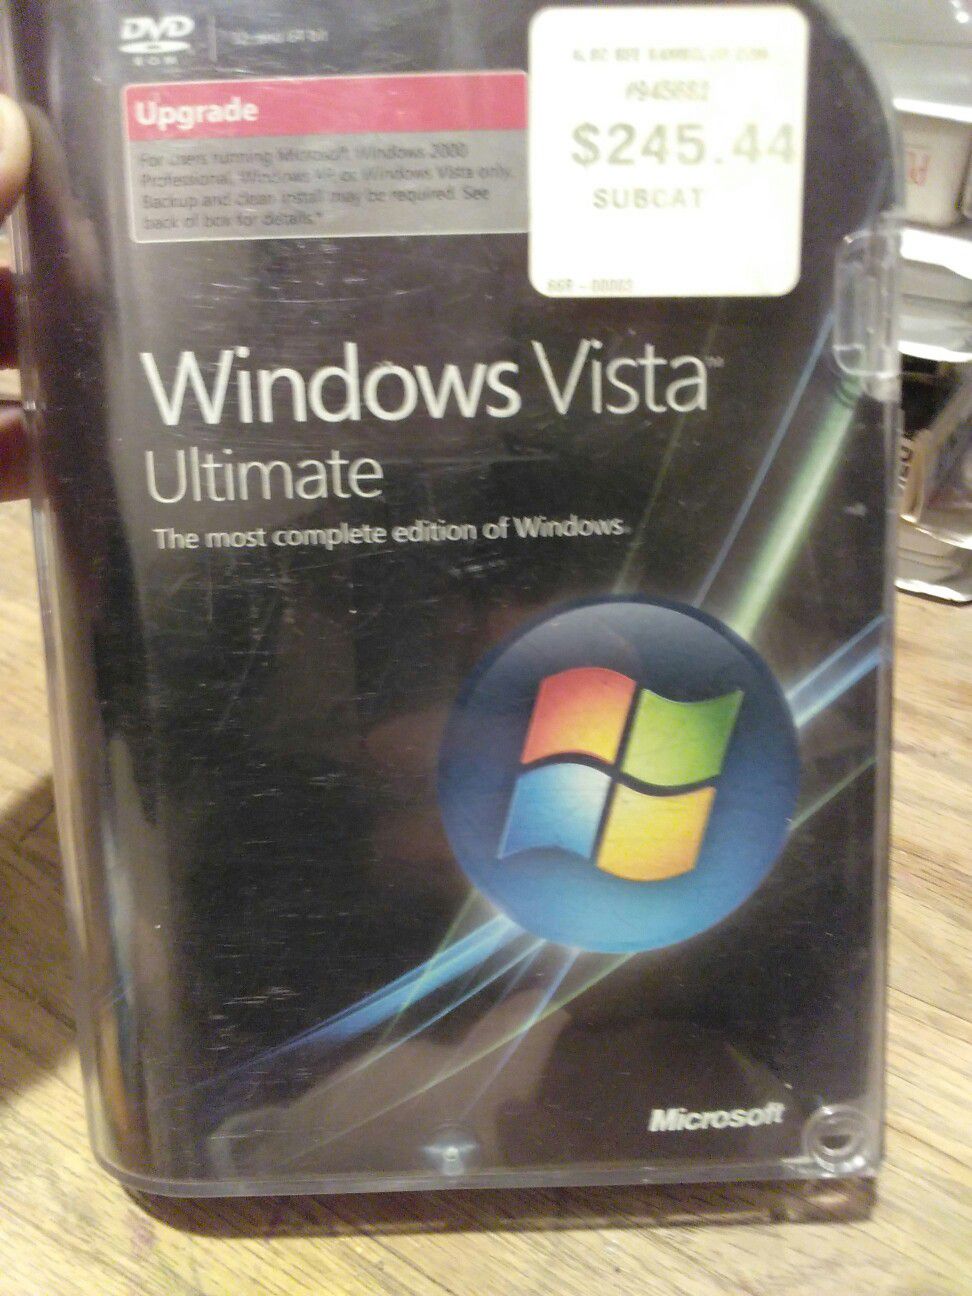 Windows Vista Ultimate: the most complete edition of windows